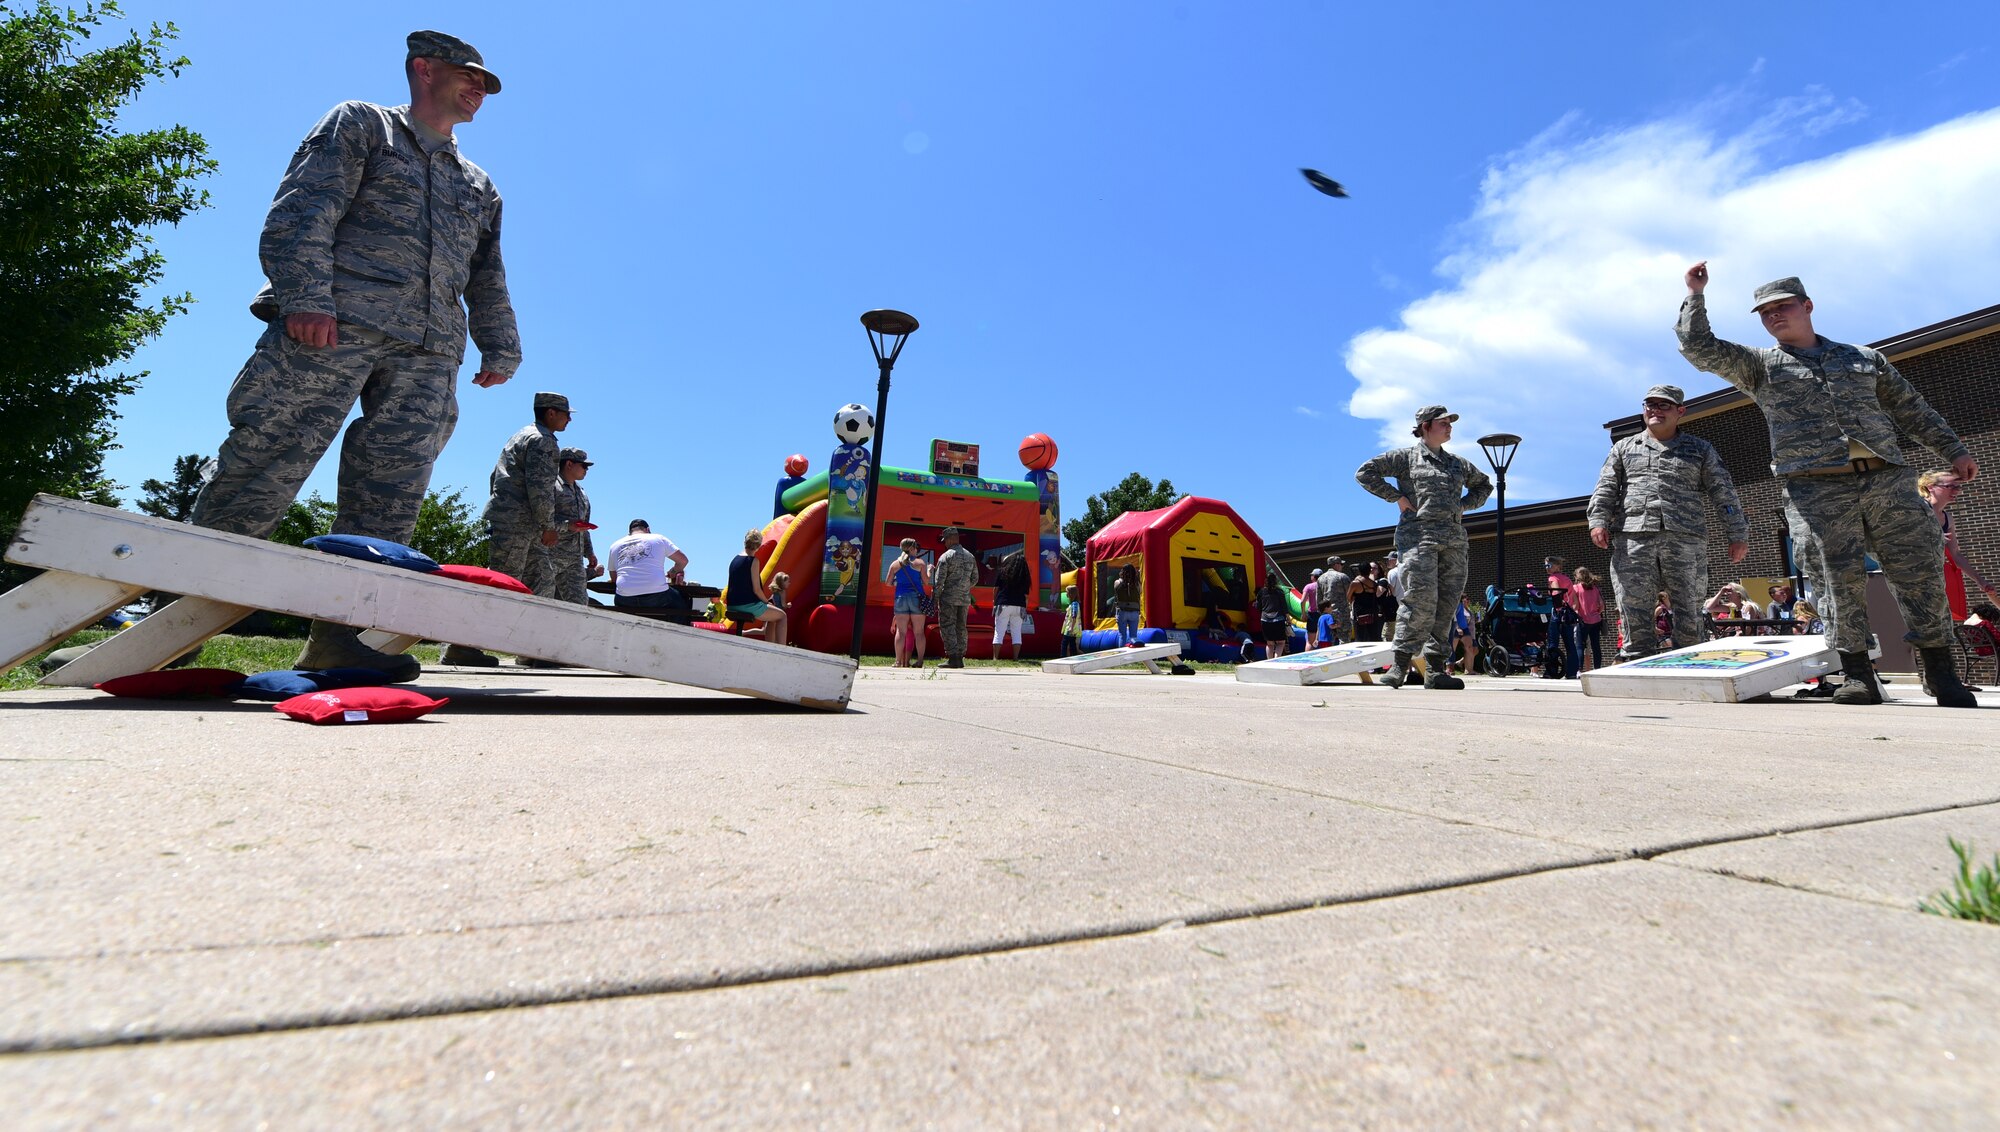 Airmen participate in a game of cornhole during the annual base picnic outside the Dakota’s Club at Ellsworth Air Force Base, S.D., June 22, 2018. The purpose of the base picnic was to thank the members of Ellsworth for their hard work, as well as celebrate the start of summer. (U.S. Air Force photo by Senior Airman Randahl Jenson)